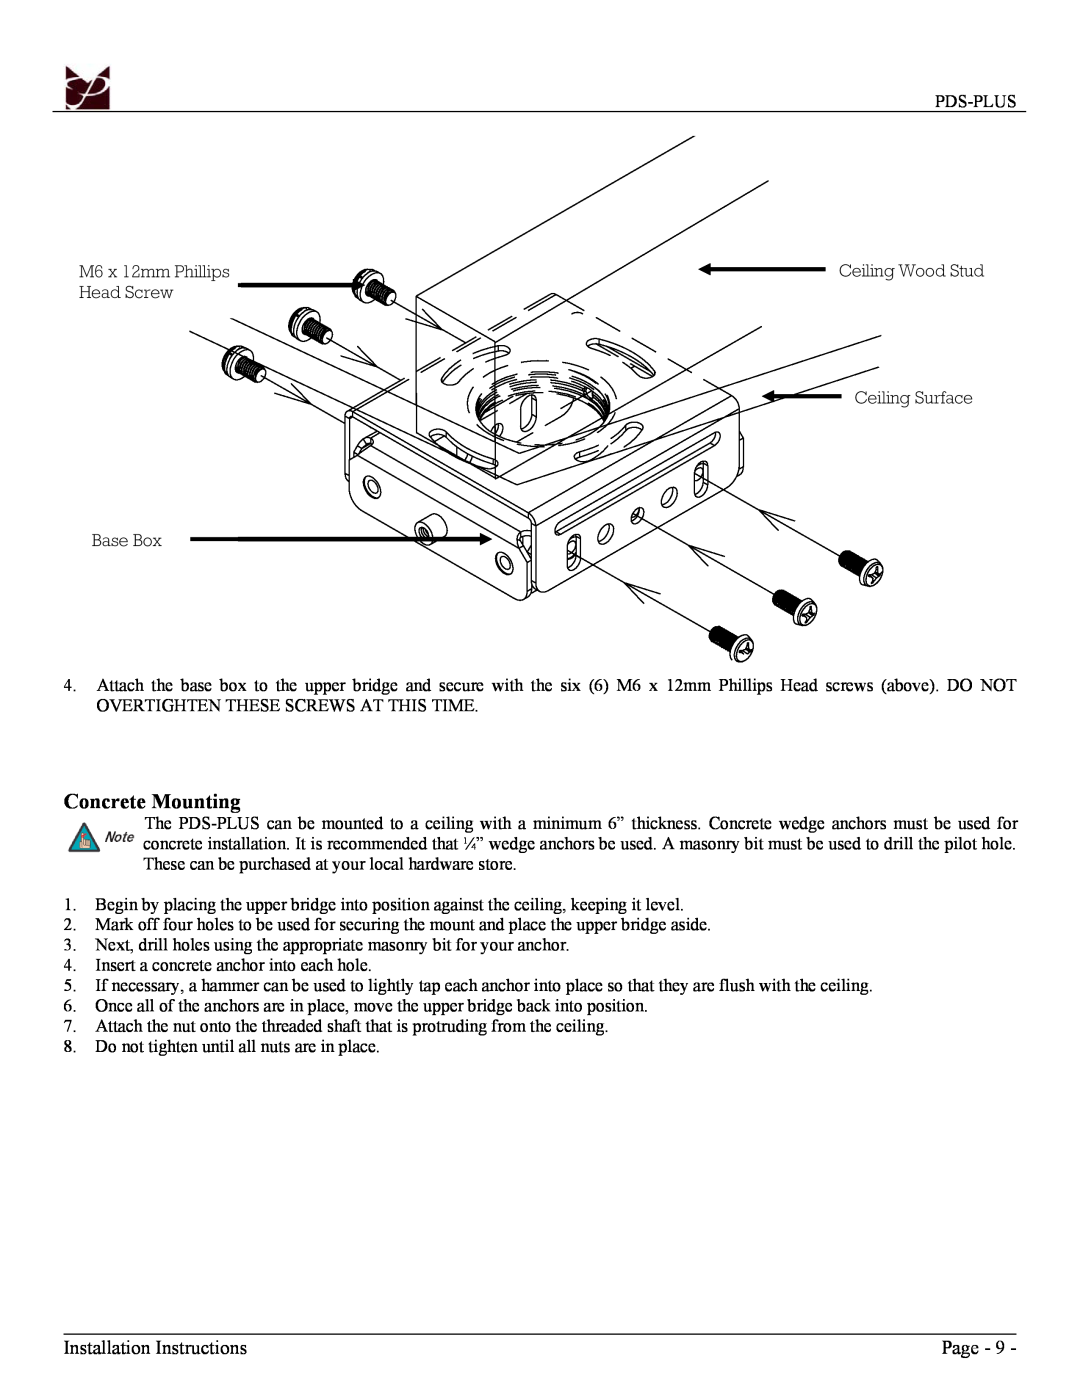 Premier Mounts PDS-PLUS installation manual Concrete Mounting, Installation Instructions, Page 